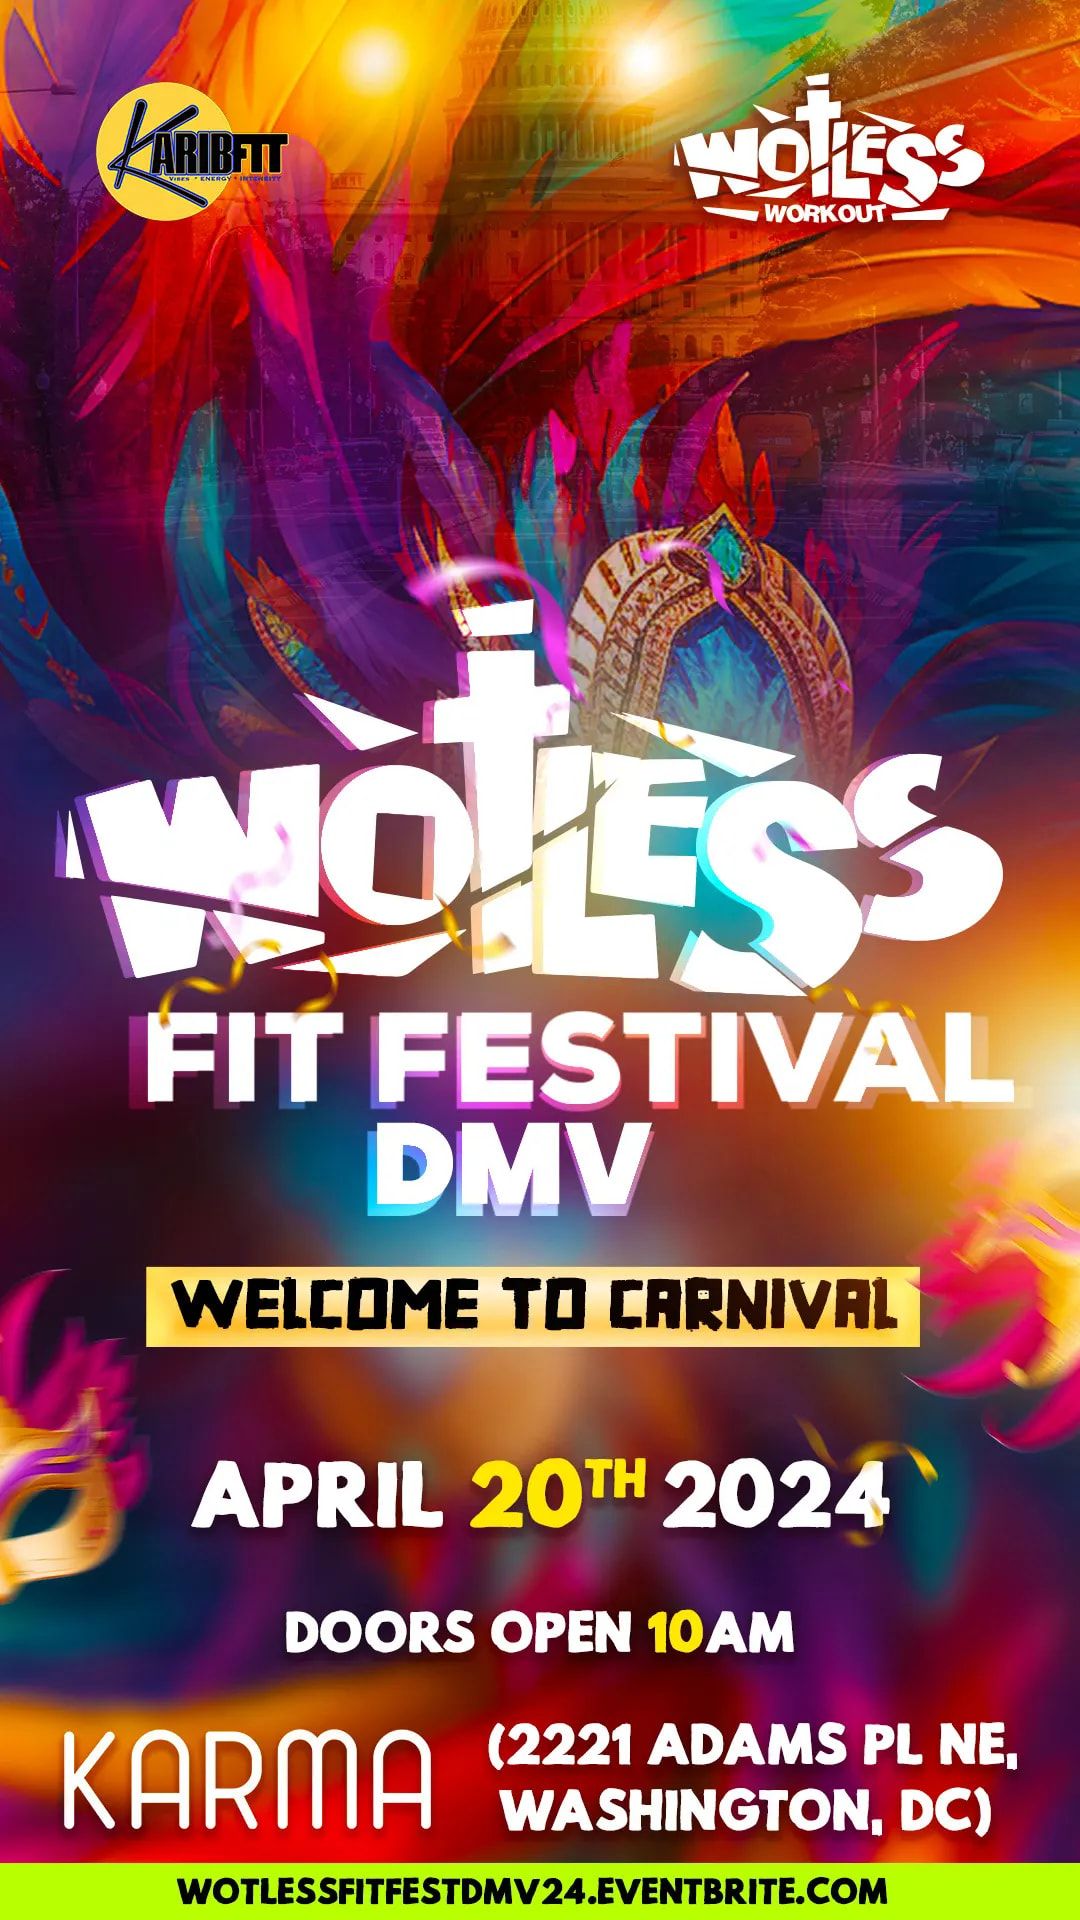 WOTLESS FIT FESTIVAL DMV " WELCOME TO CARNIVAL